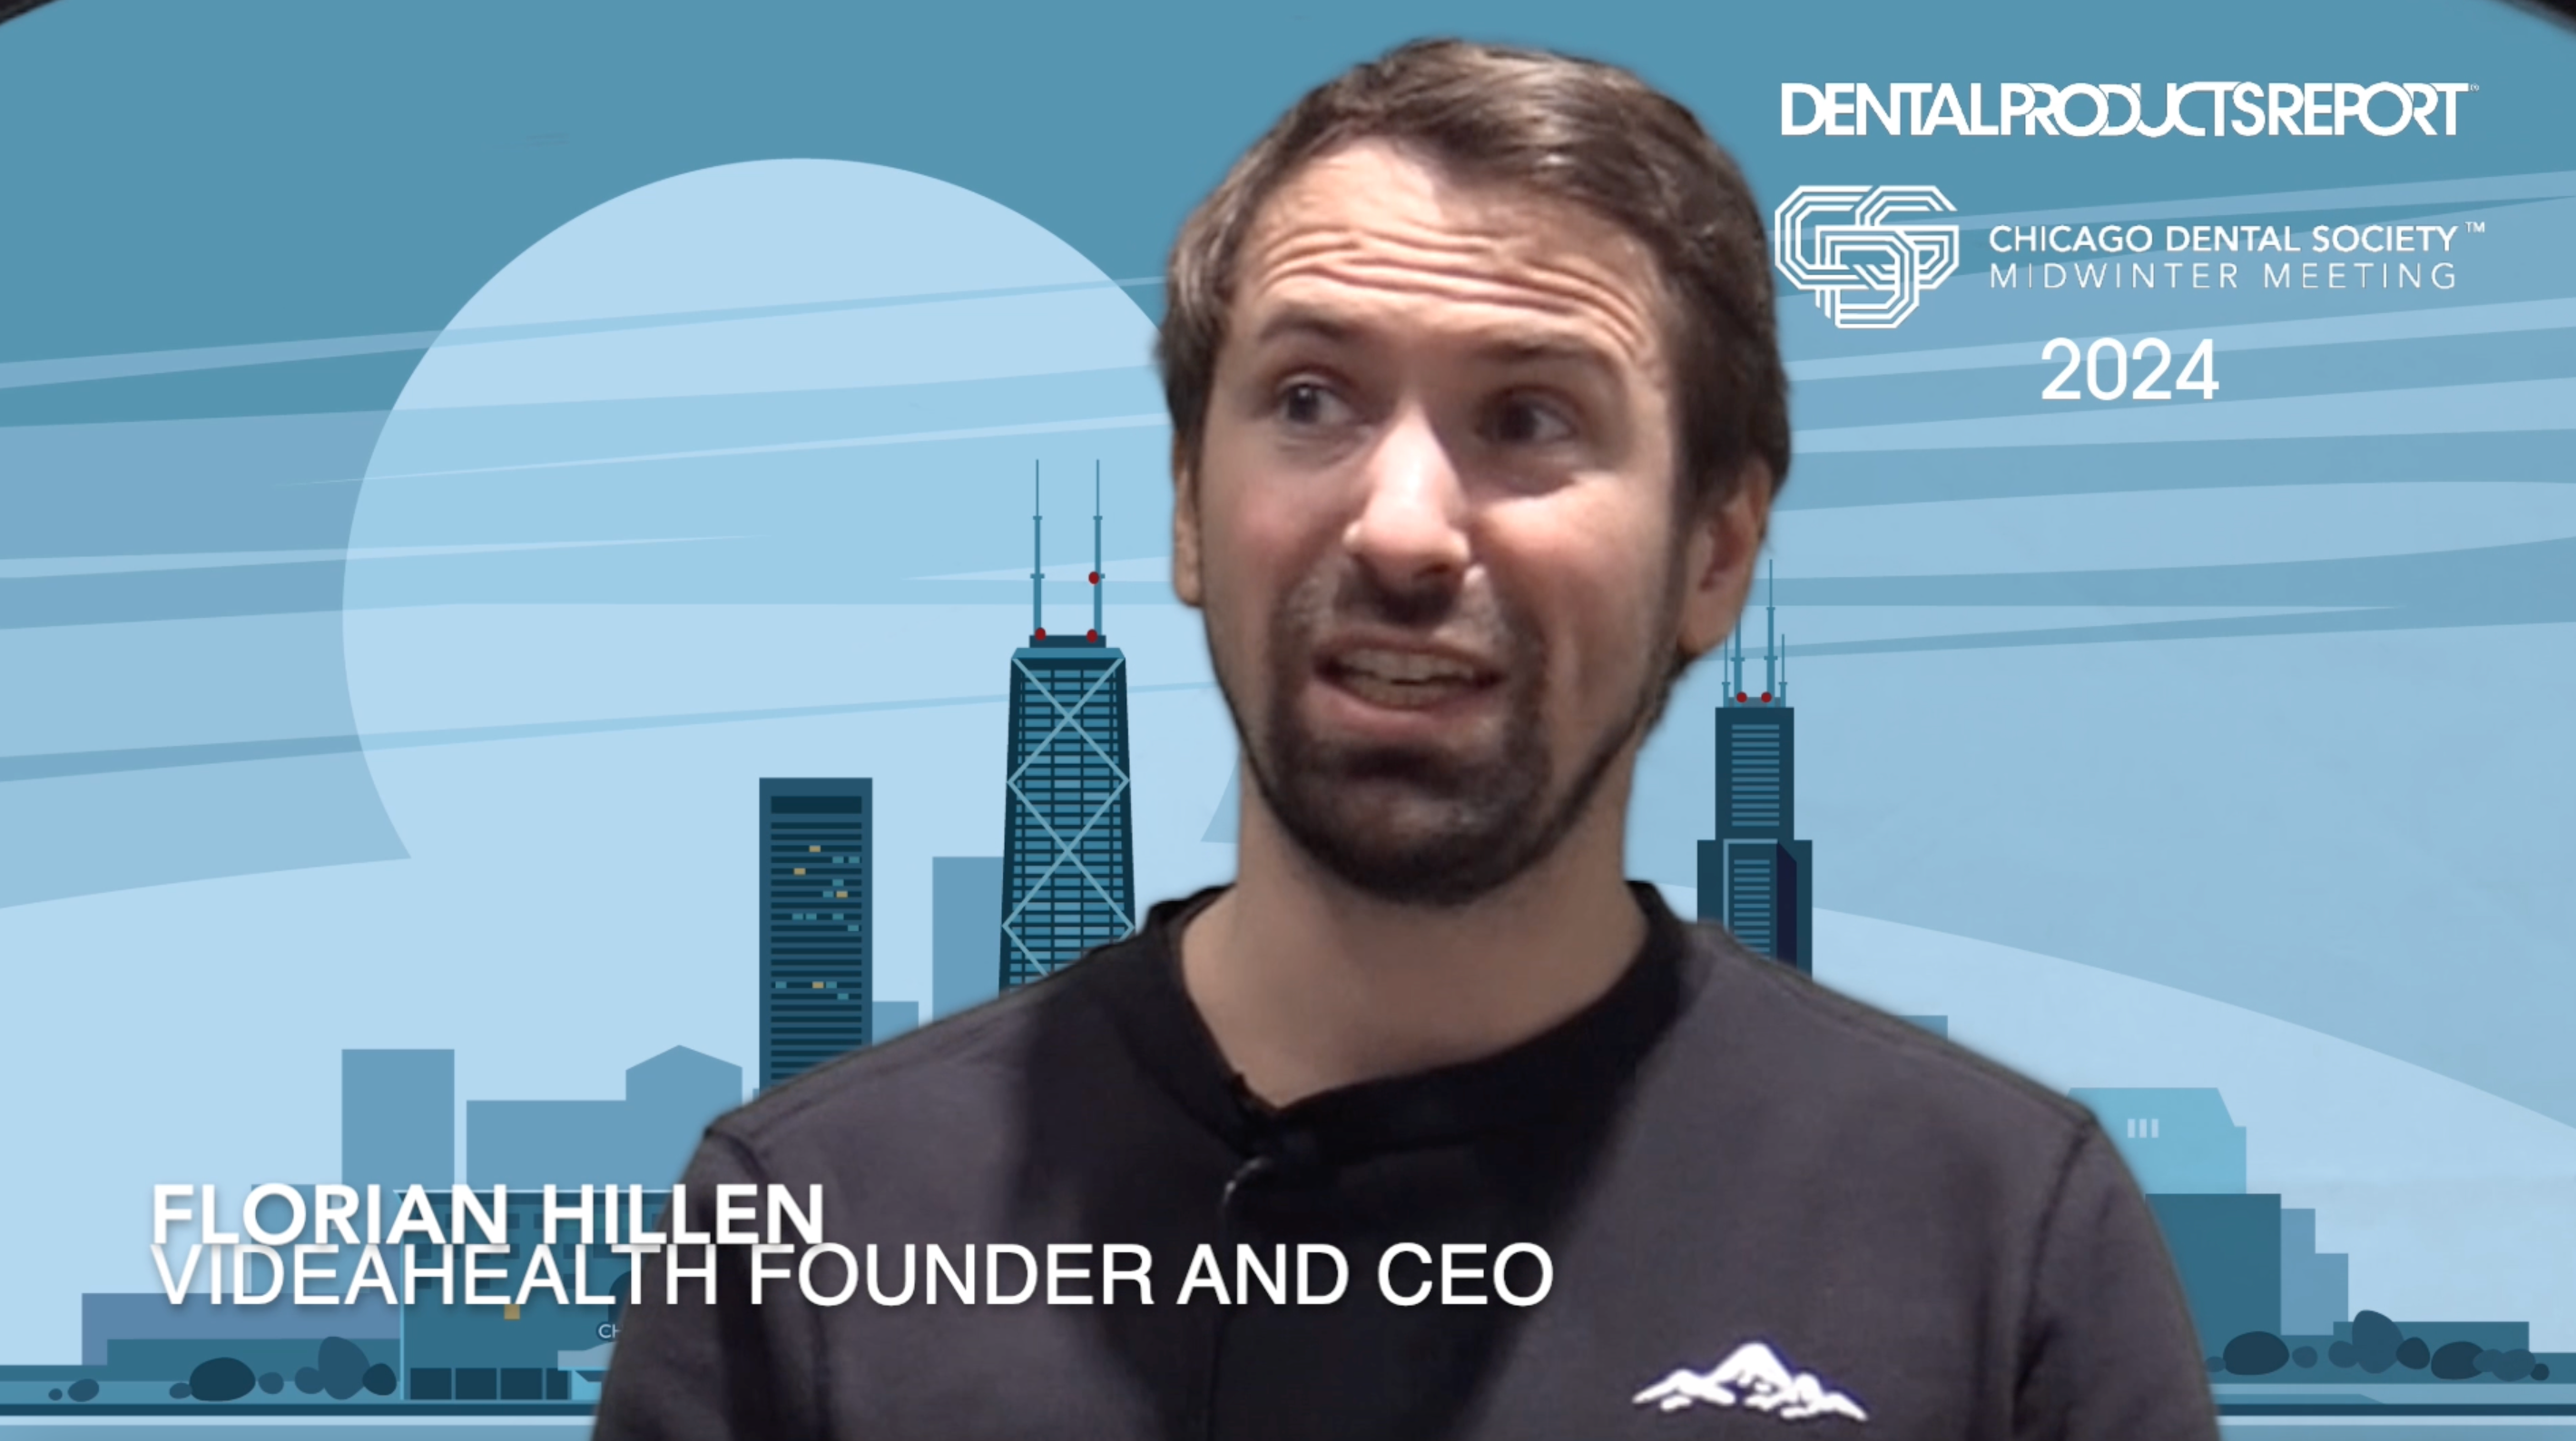 2024 Chicago Dental Society Midwinter Meeting – Interview with Florian Hillen, Founder and CEO at VideaHealth